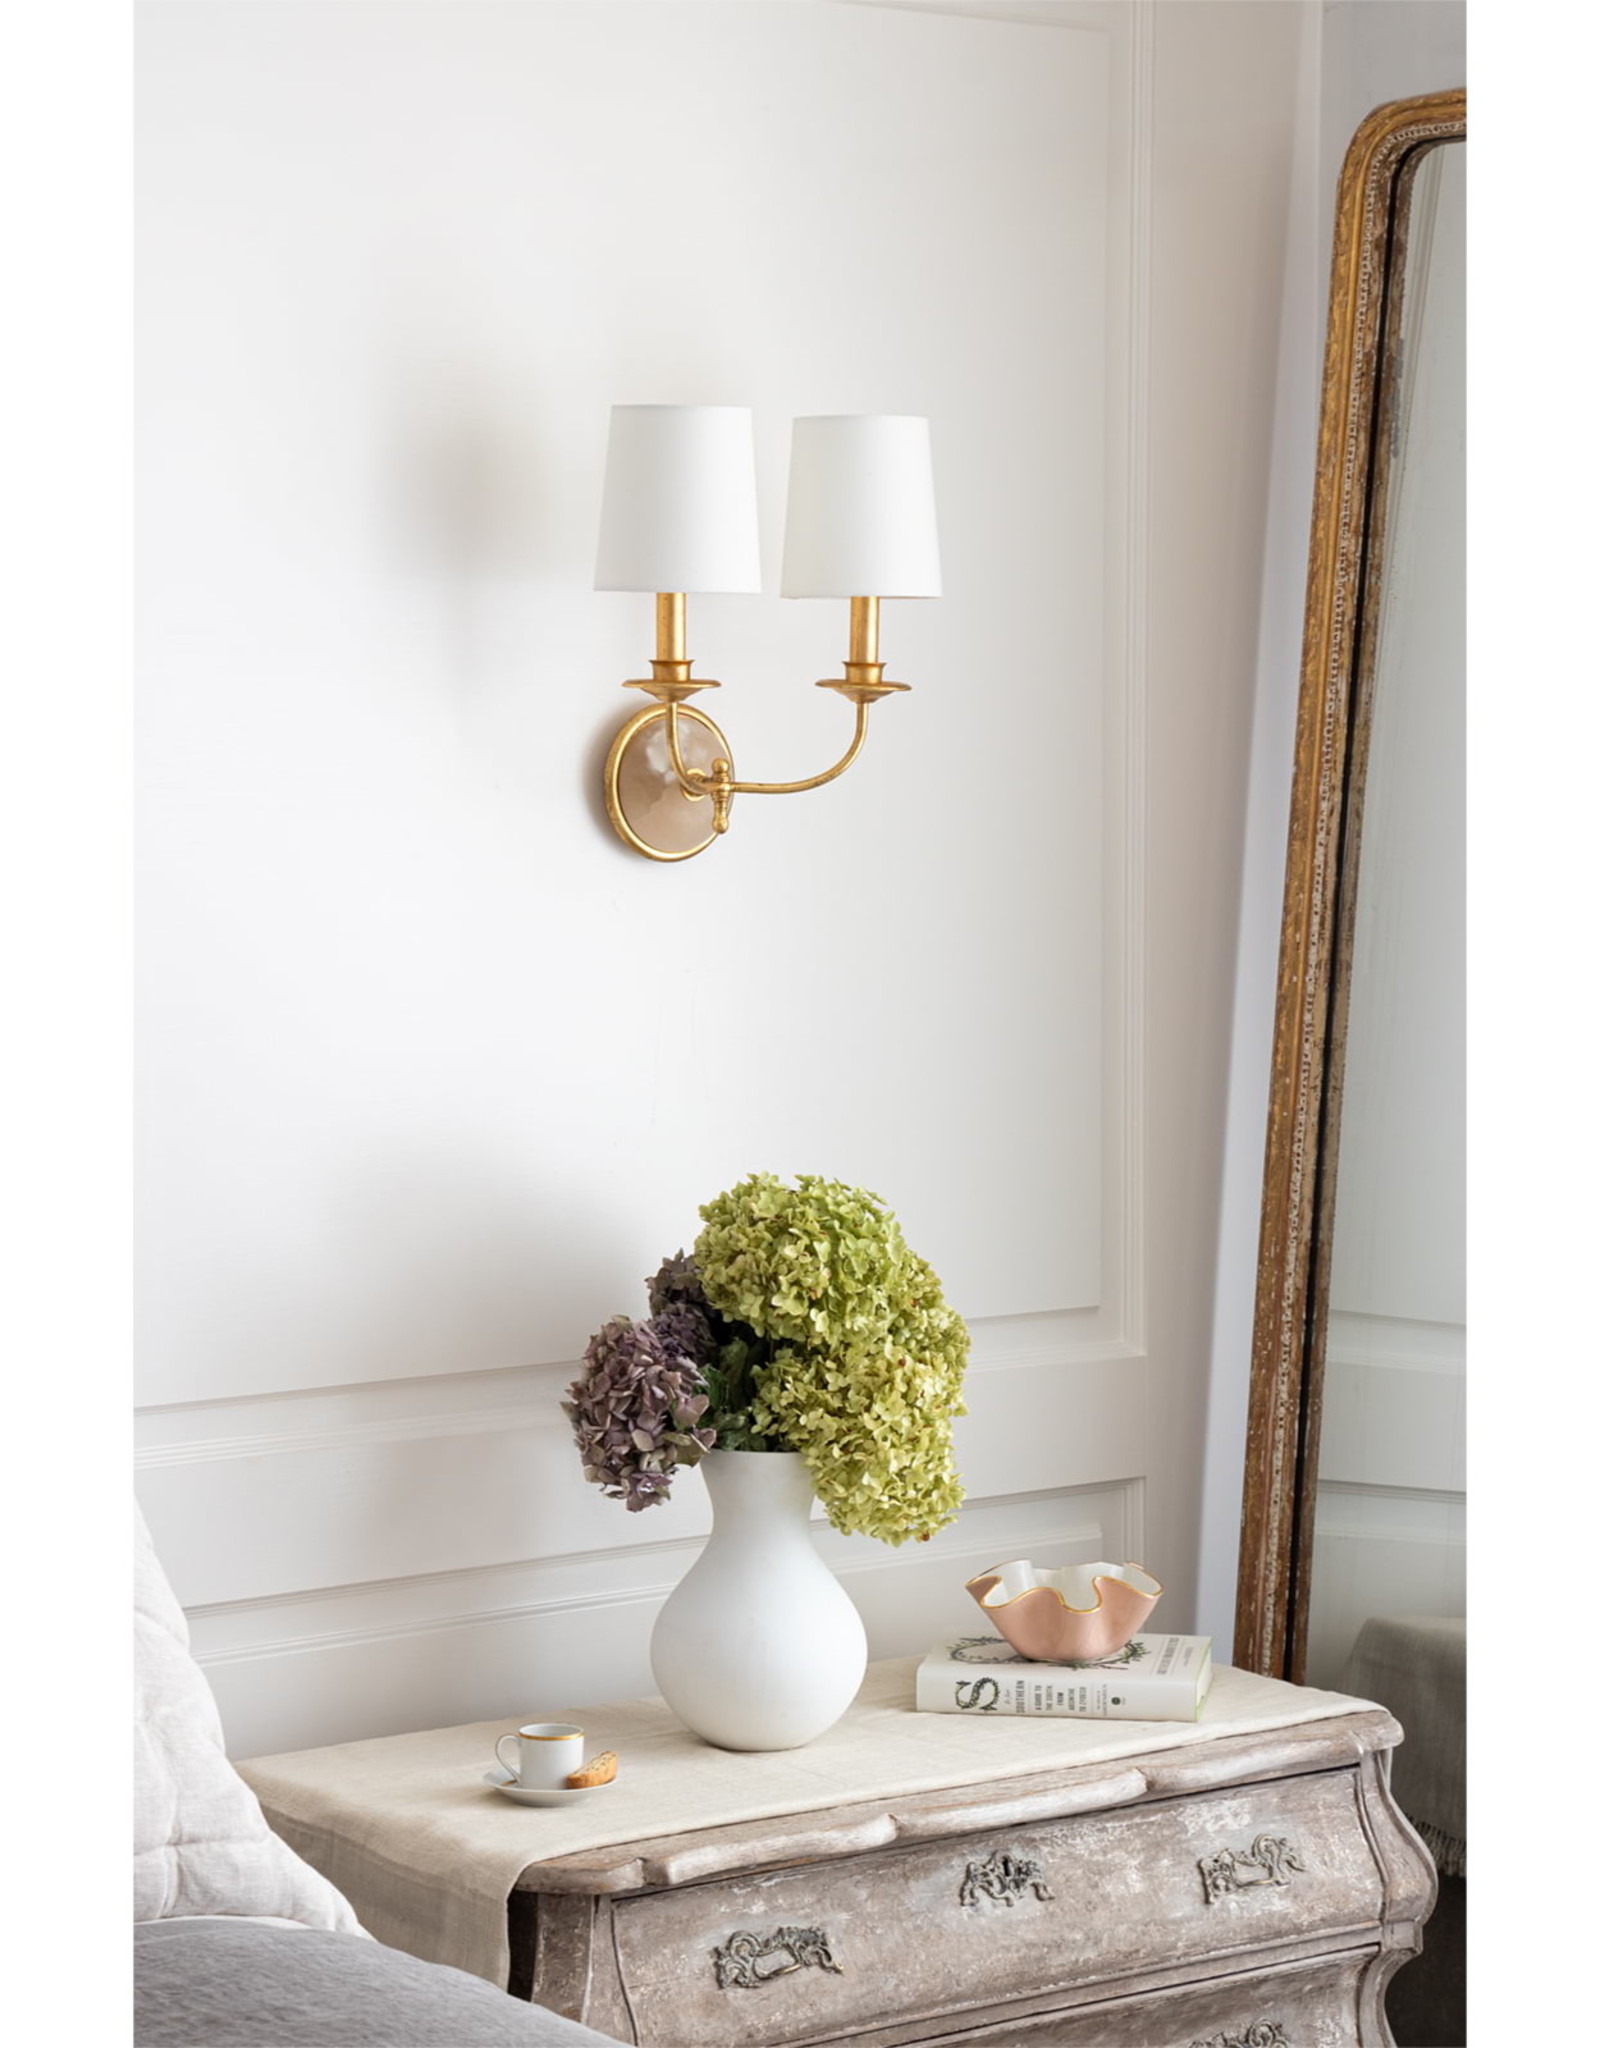 Southern Living Fisher Sconce Double